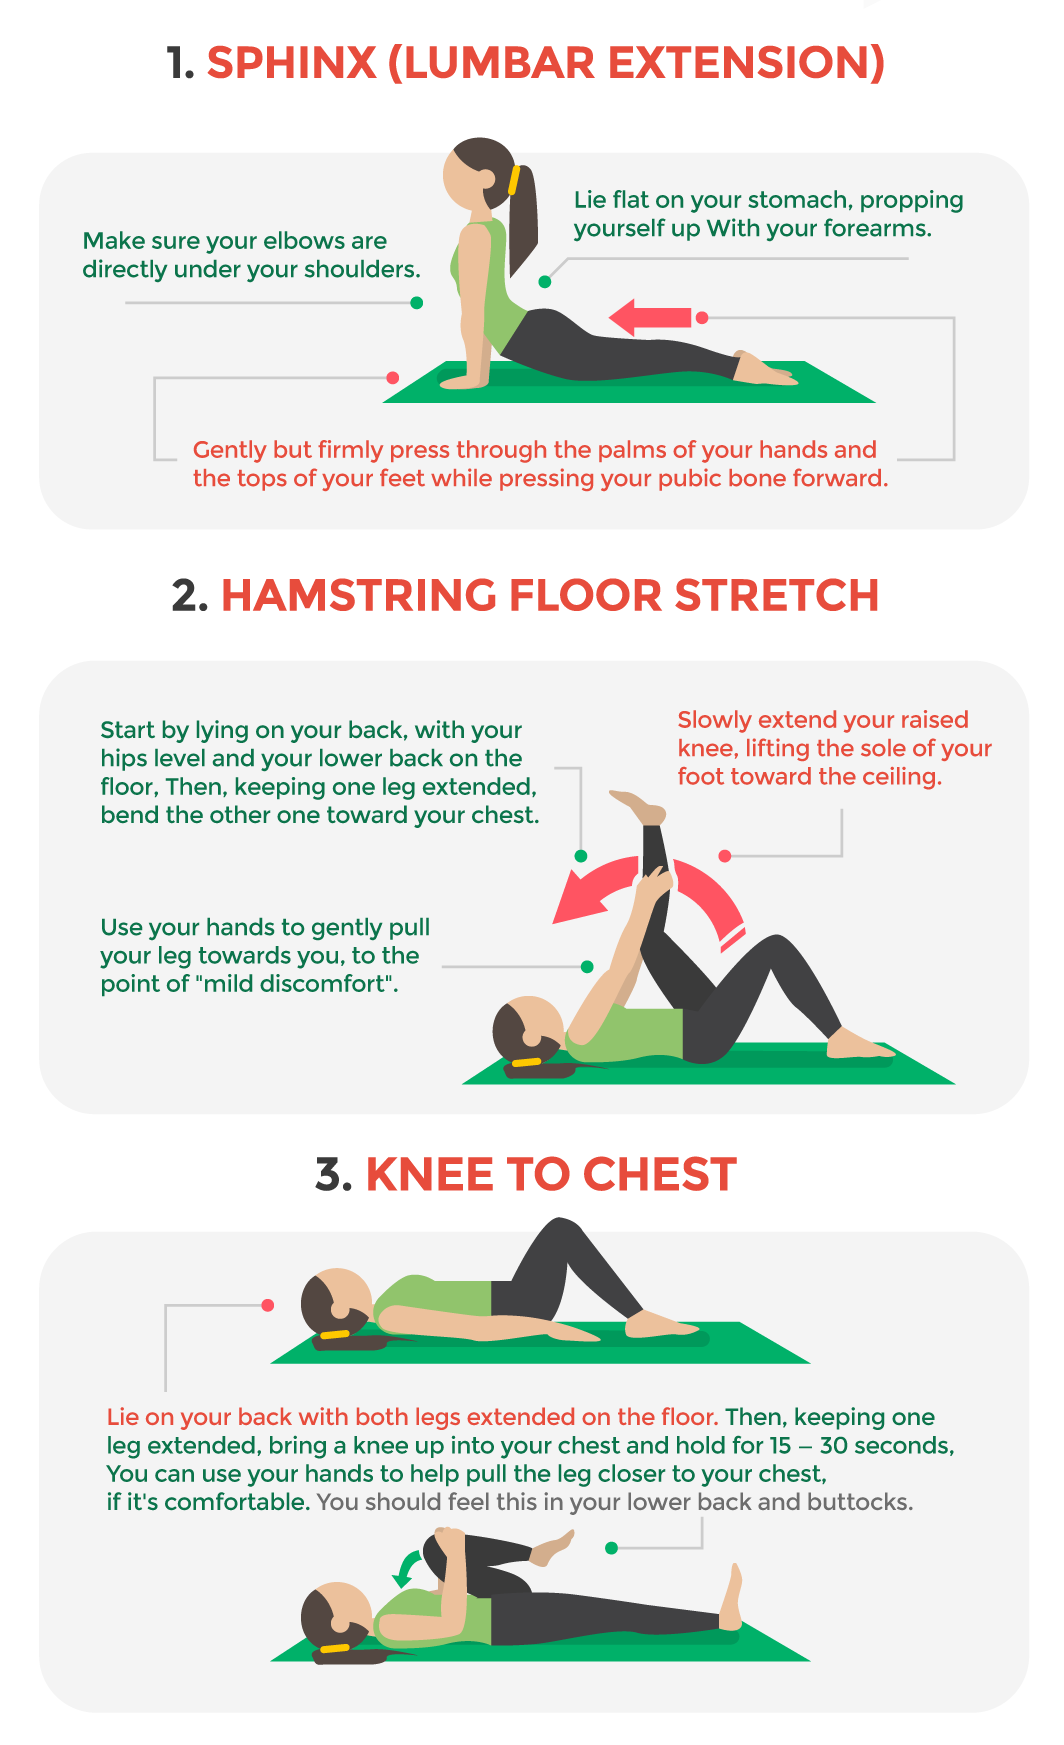 back-pain-exercises-x3-stretches-body-balance-physical-therapy